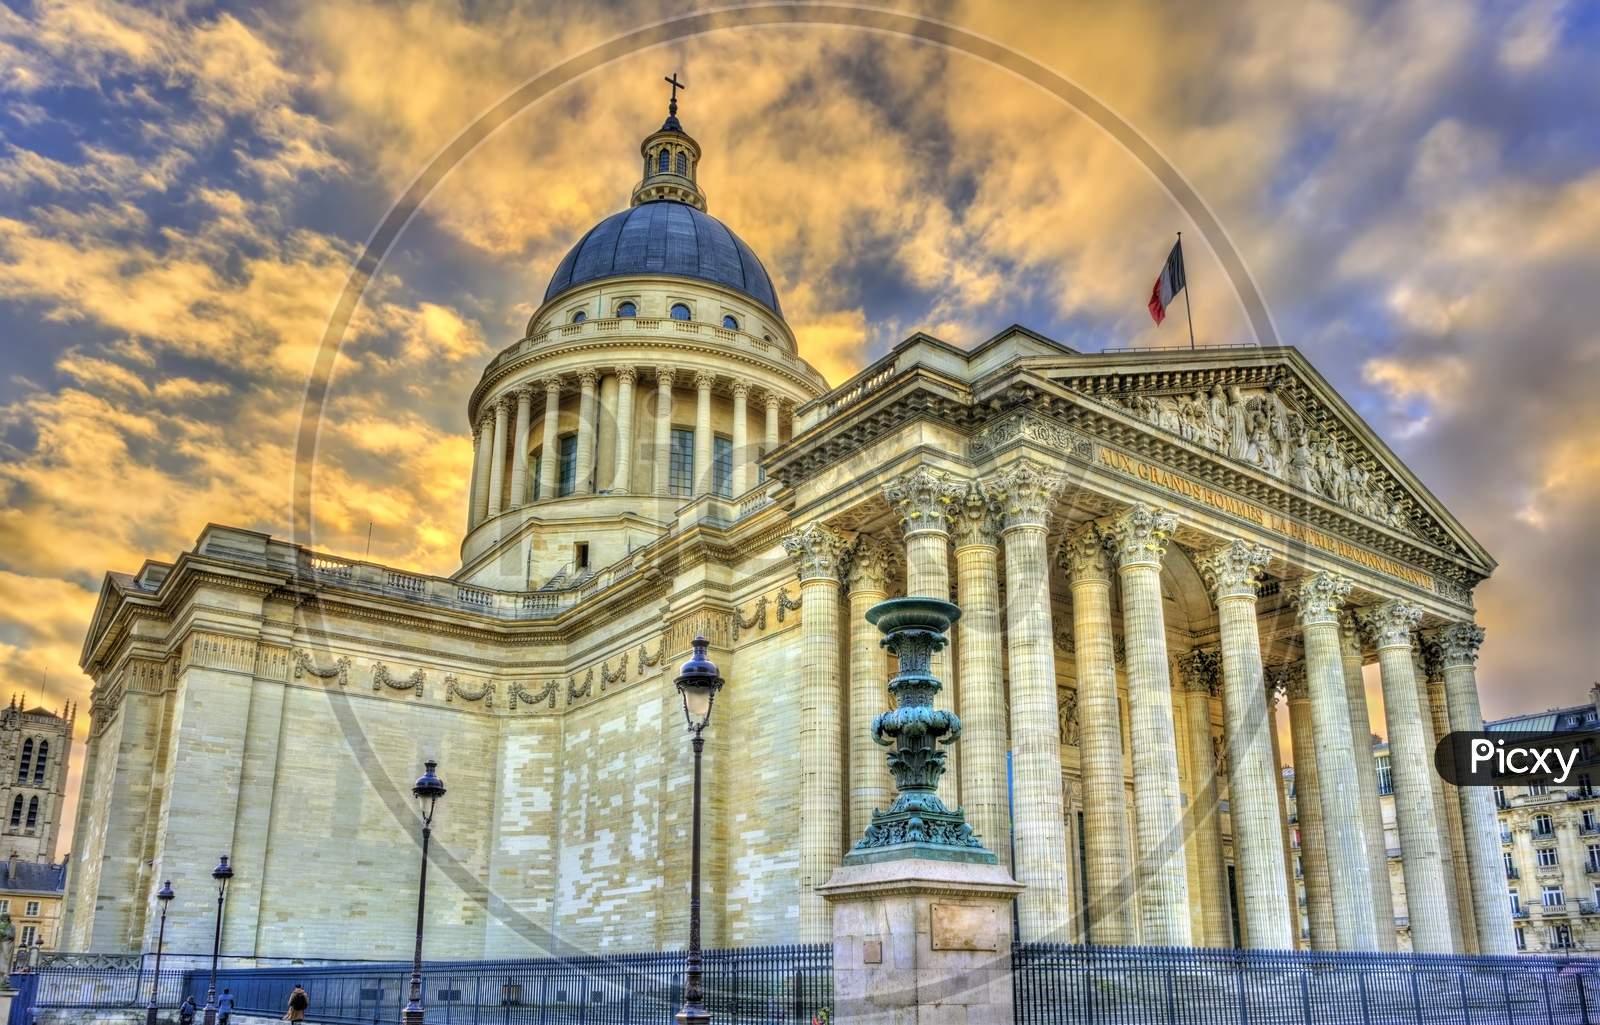 The Pantheon In Paris, A Secular Mausoleum Containing The Remains Of Distinguished French Citizens.